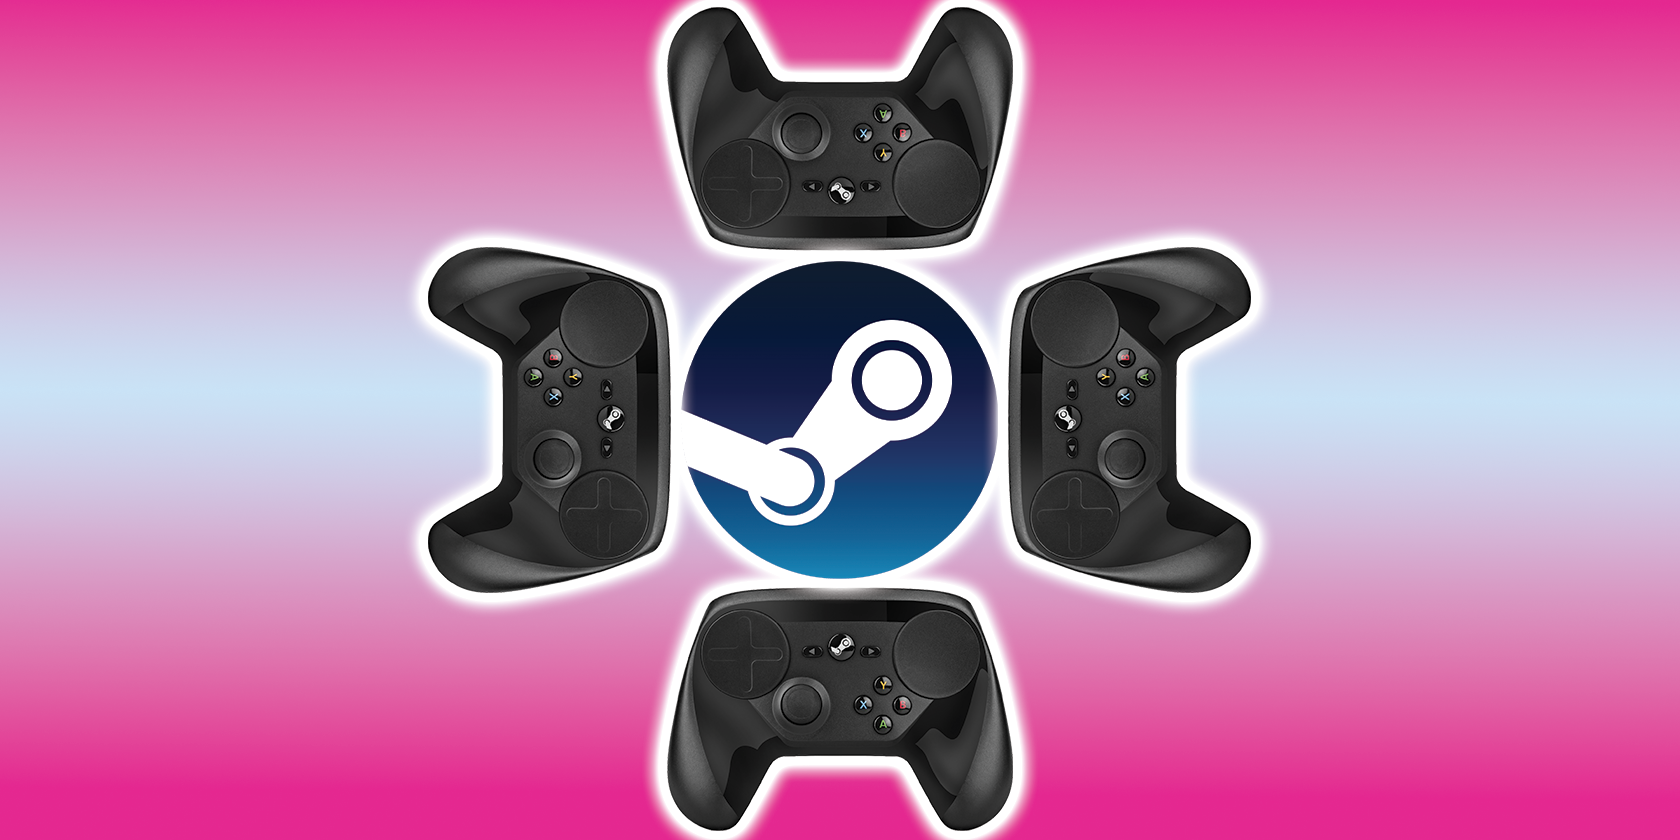 Everyone Can Now Remote Play Together With Steam